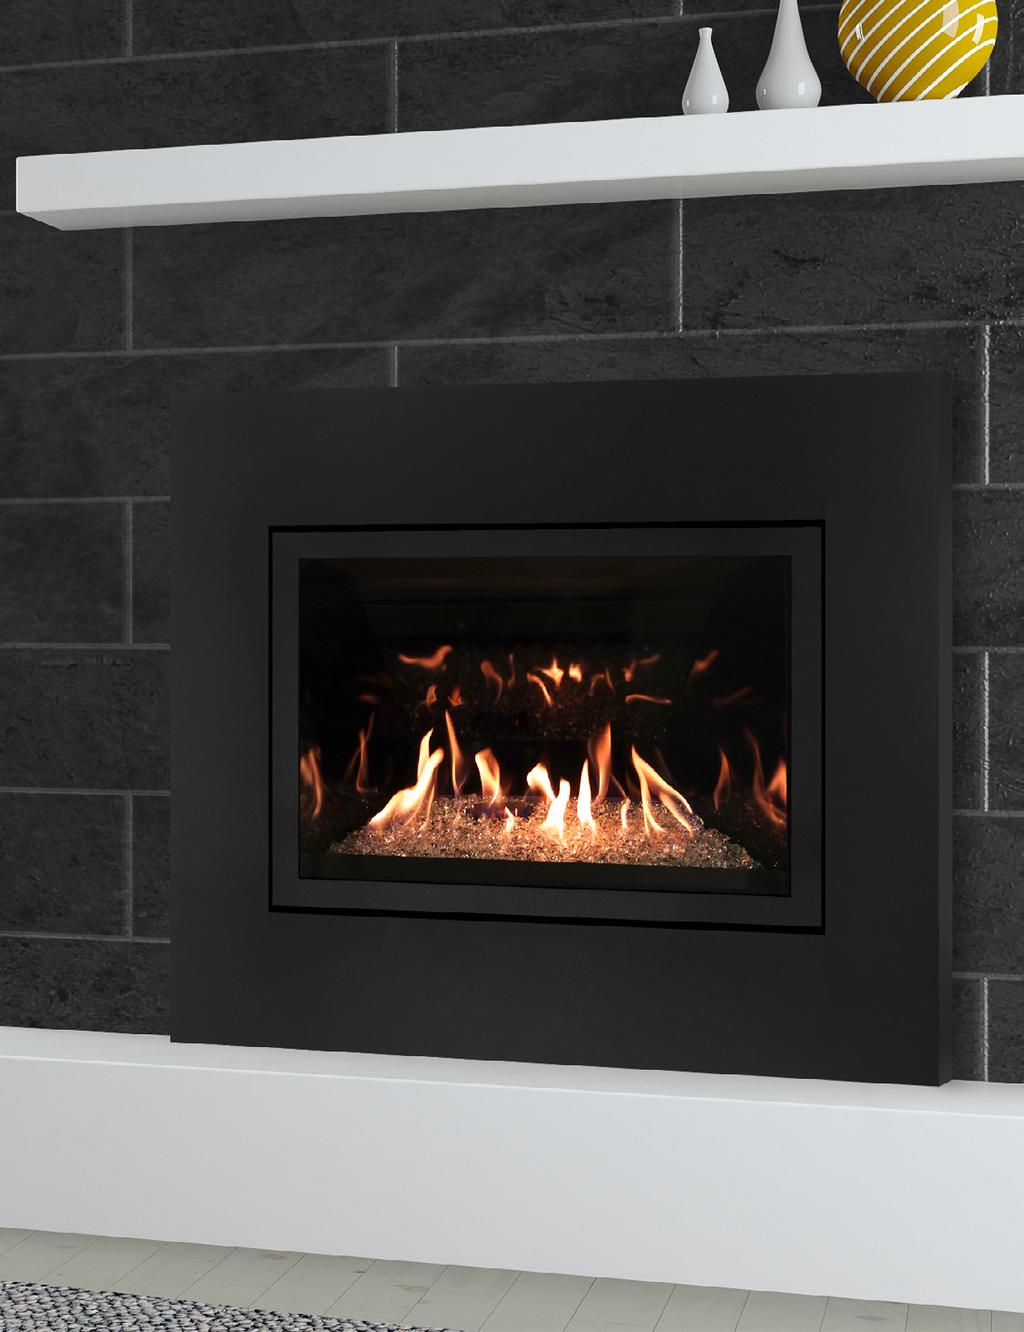 Your local hearth retailer can help you decide which fuel will suit your needs and lifestyle.